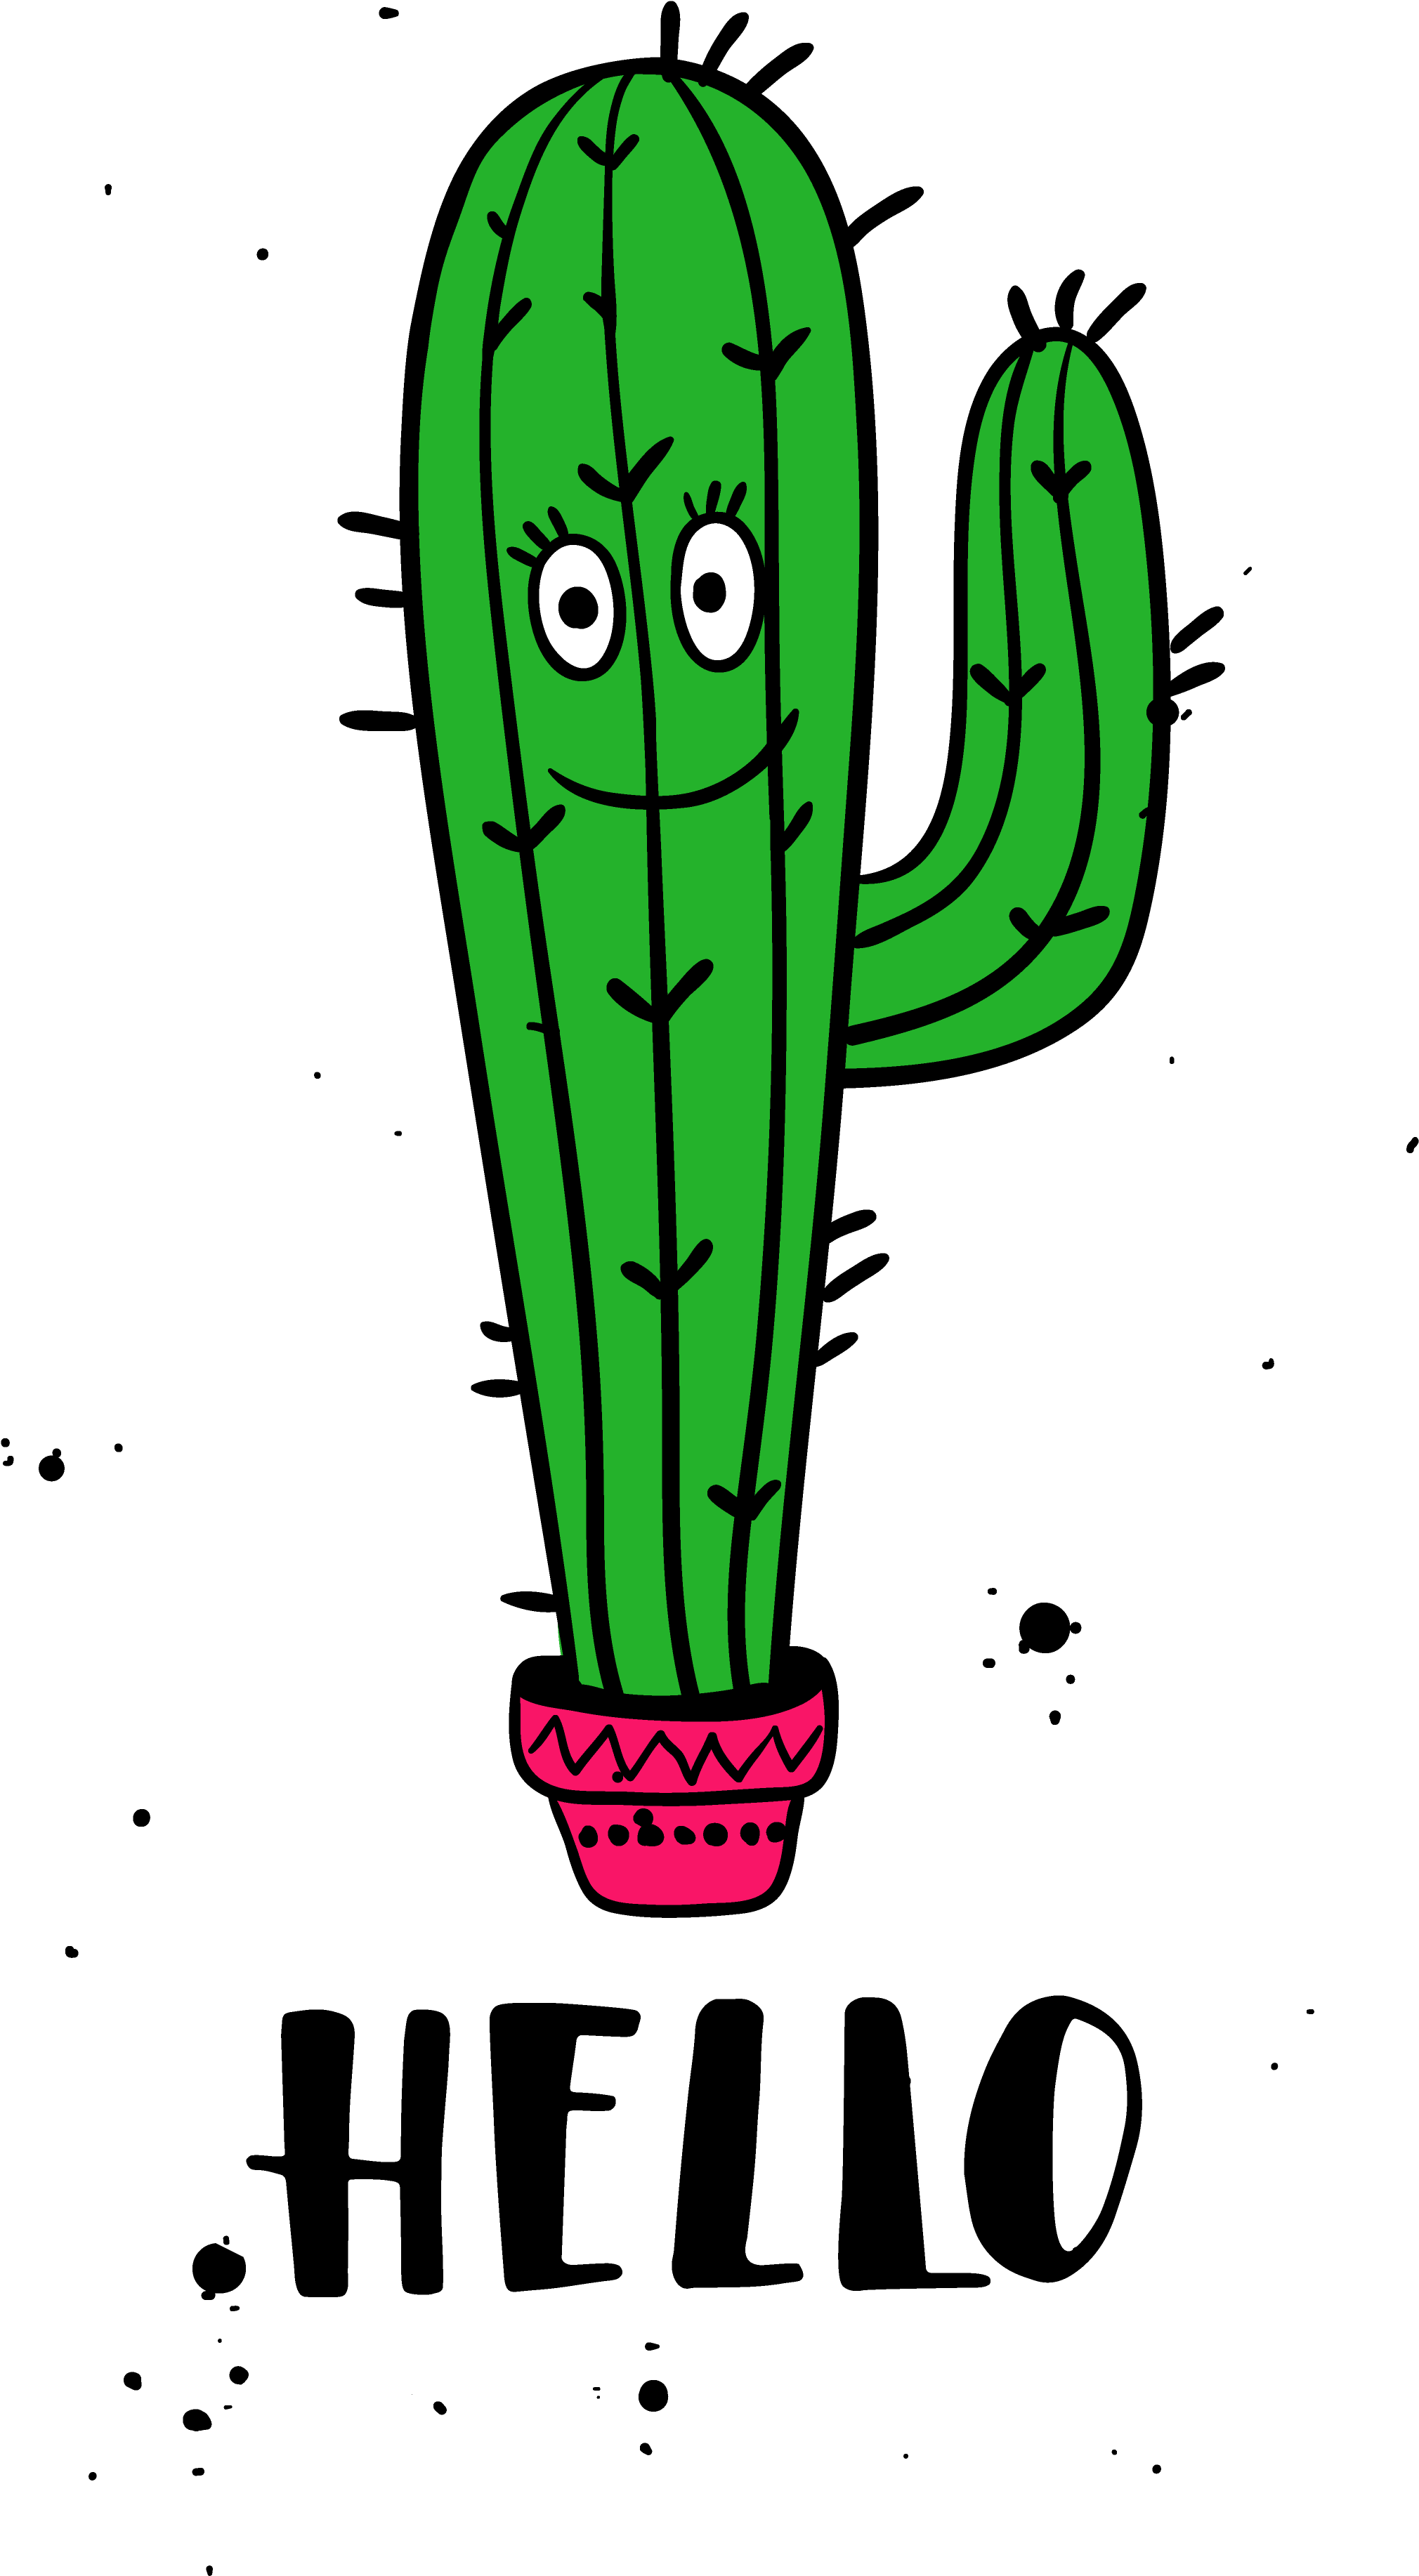 Cactaceae Eastern Prickly Pear Scalable Vector Graphics - Cactus (4167x5000)